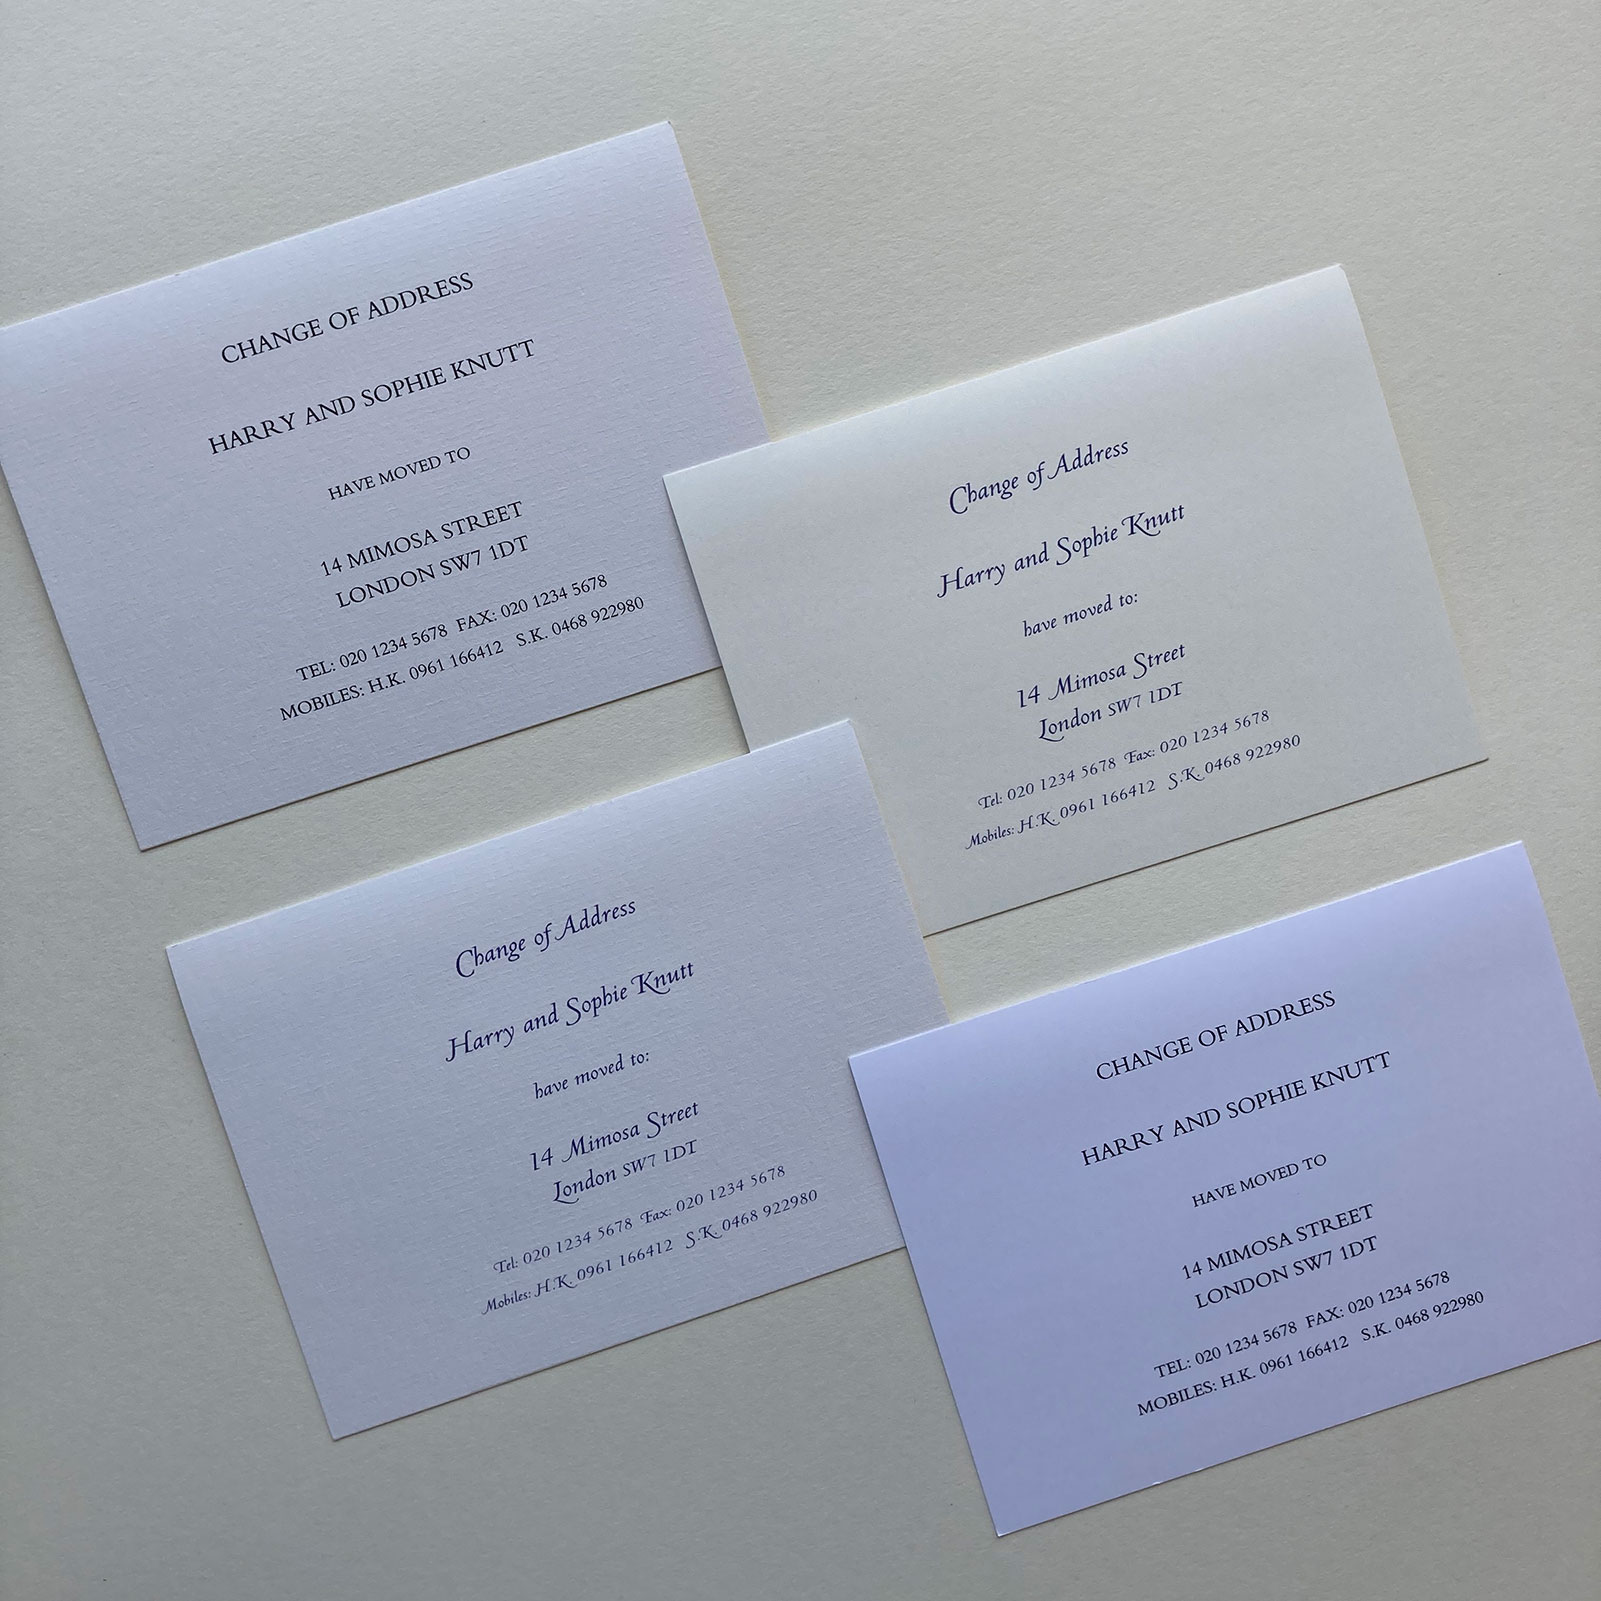 Change of Address Cards Personal Stationery Gee Brothers